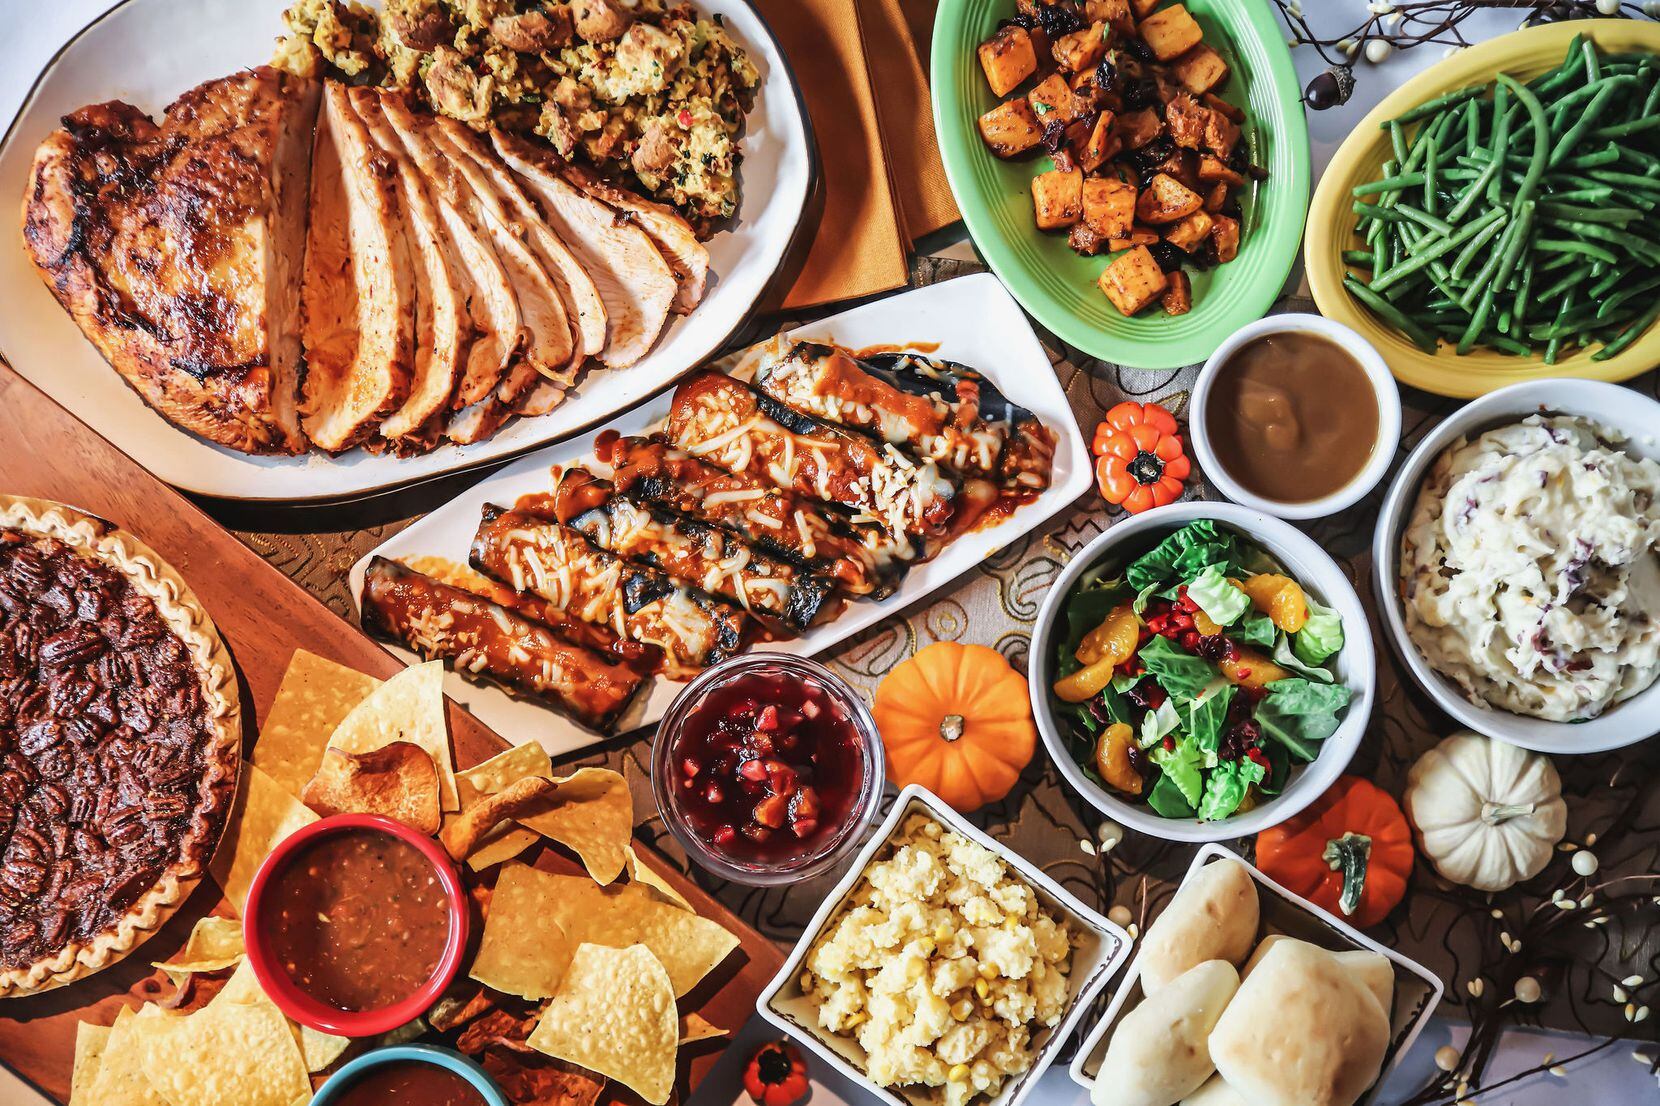 Blue Mesa Grill's to-go Thanksgiving package includes a whole roasted boneless turkey...